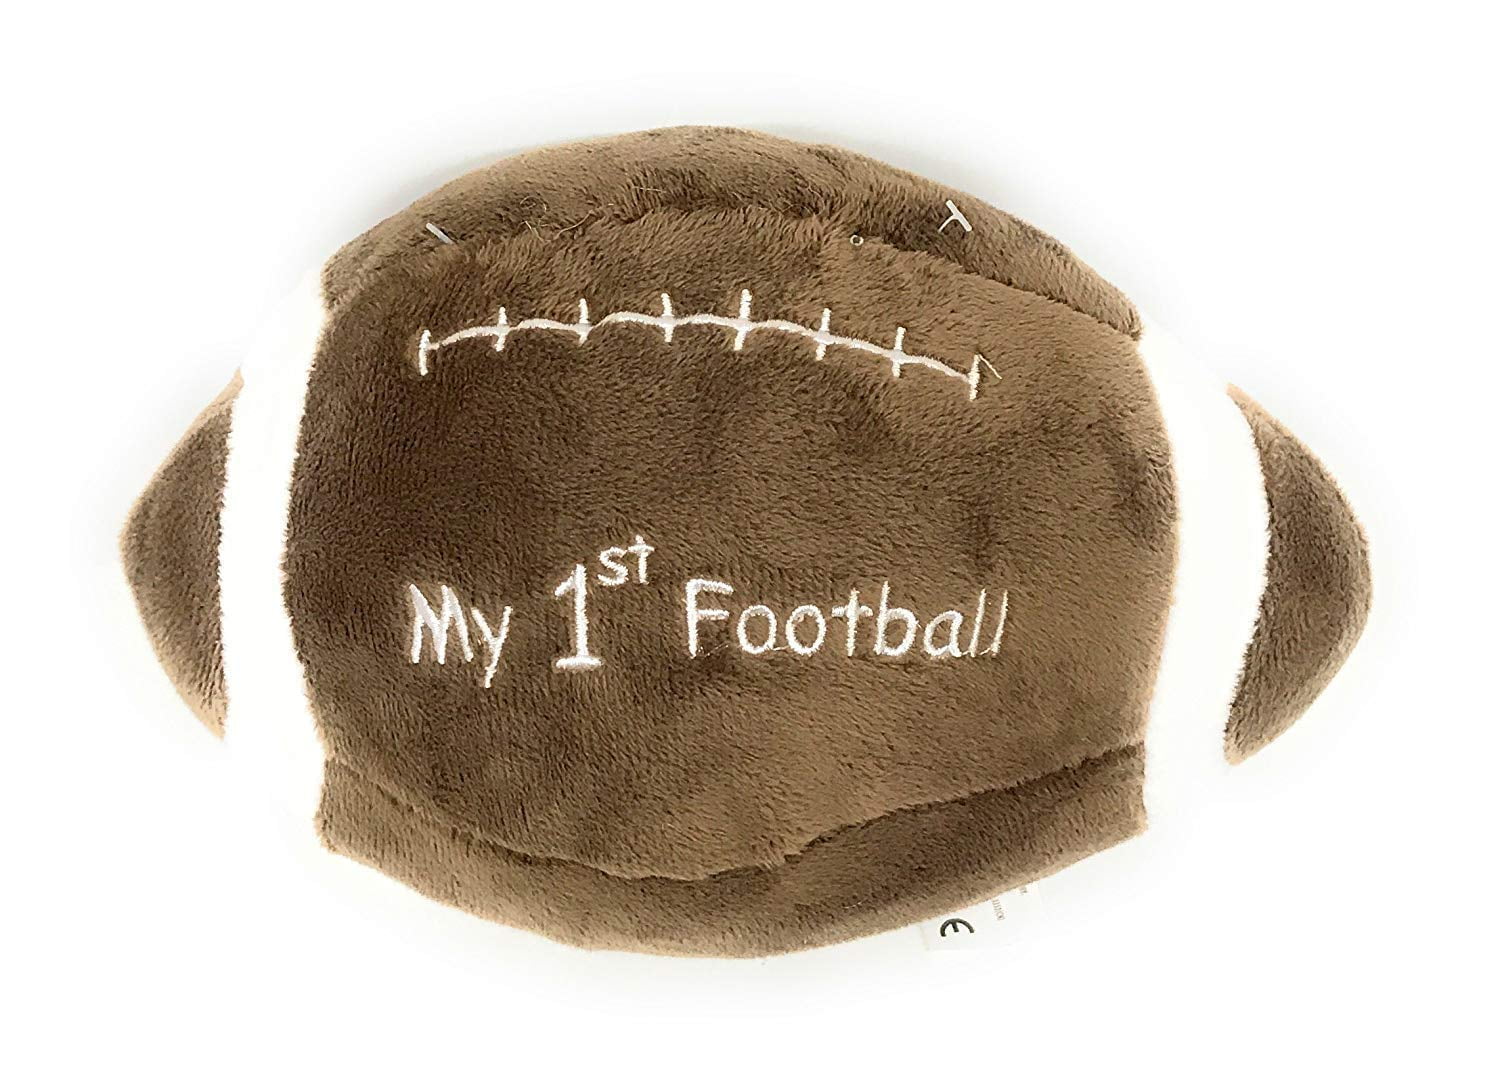 Kellybaby Soft Plush My 1st Football Toy and Rattle Size 9